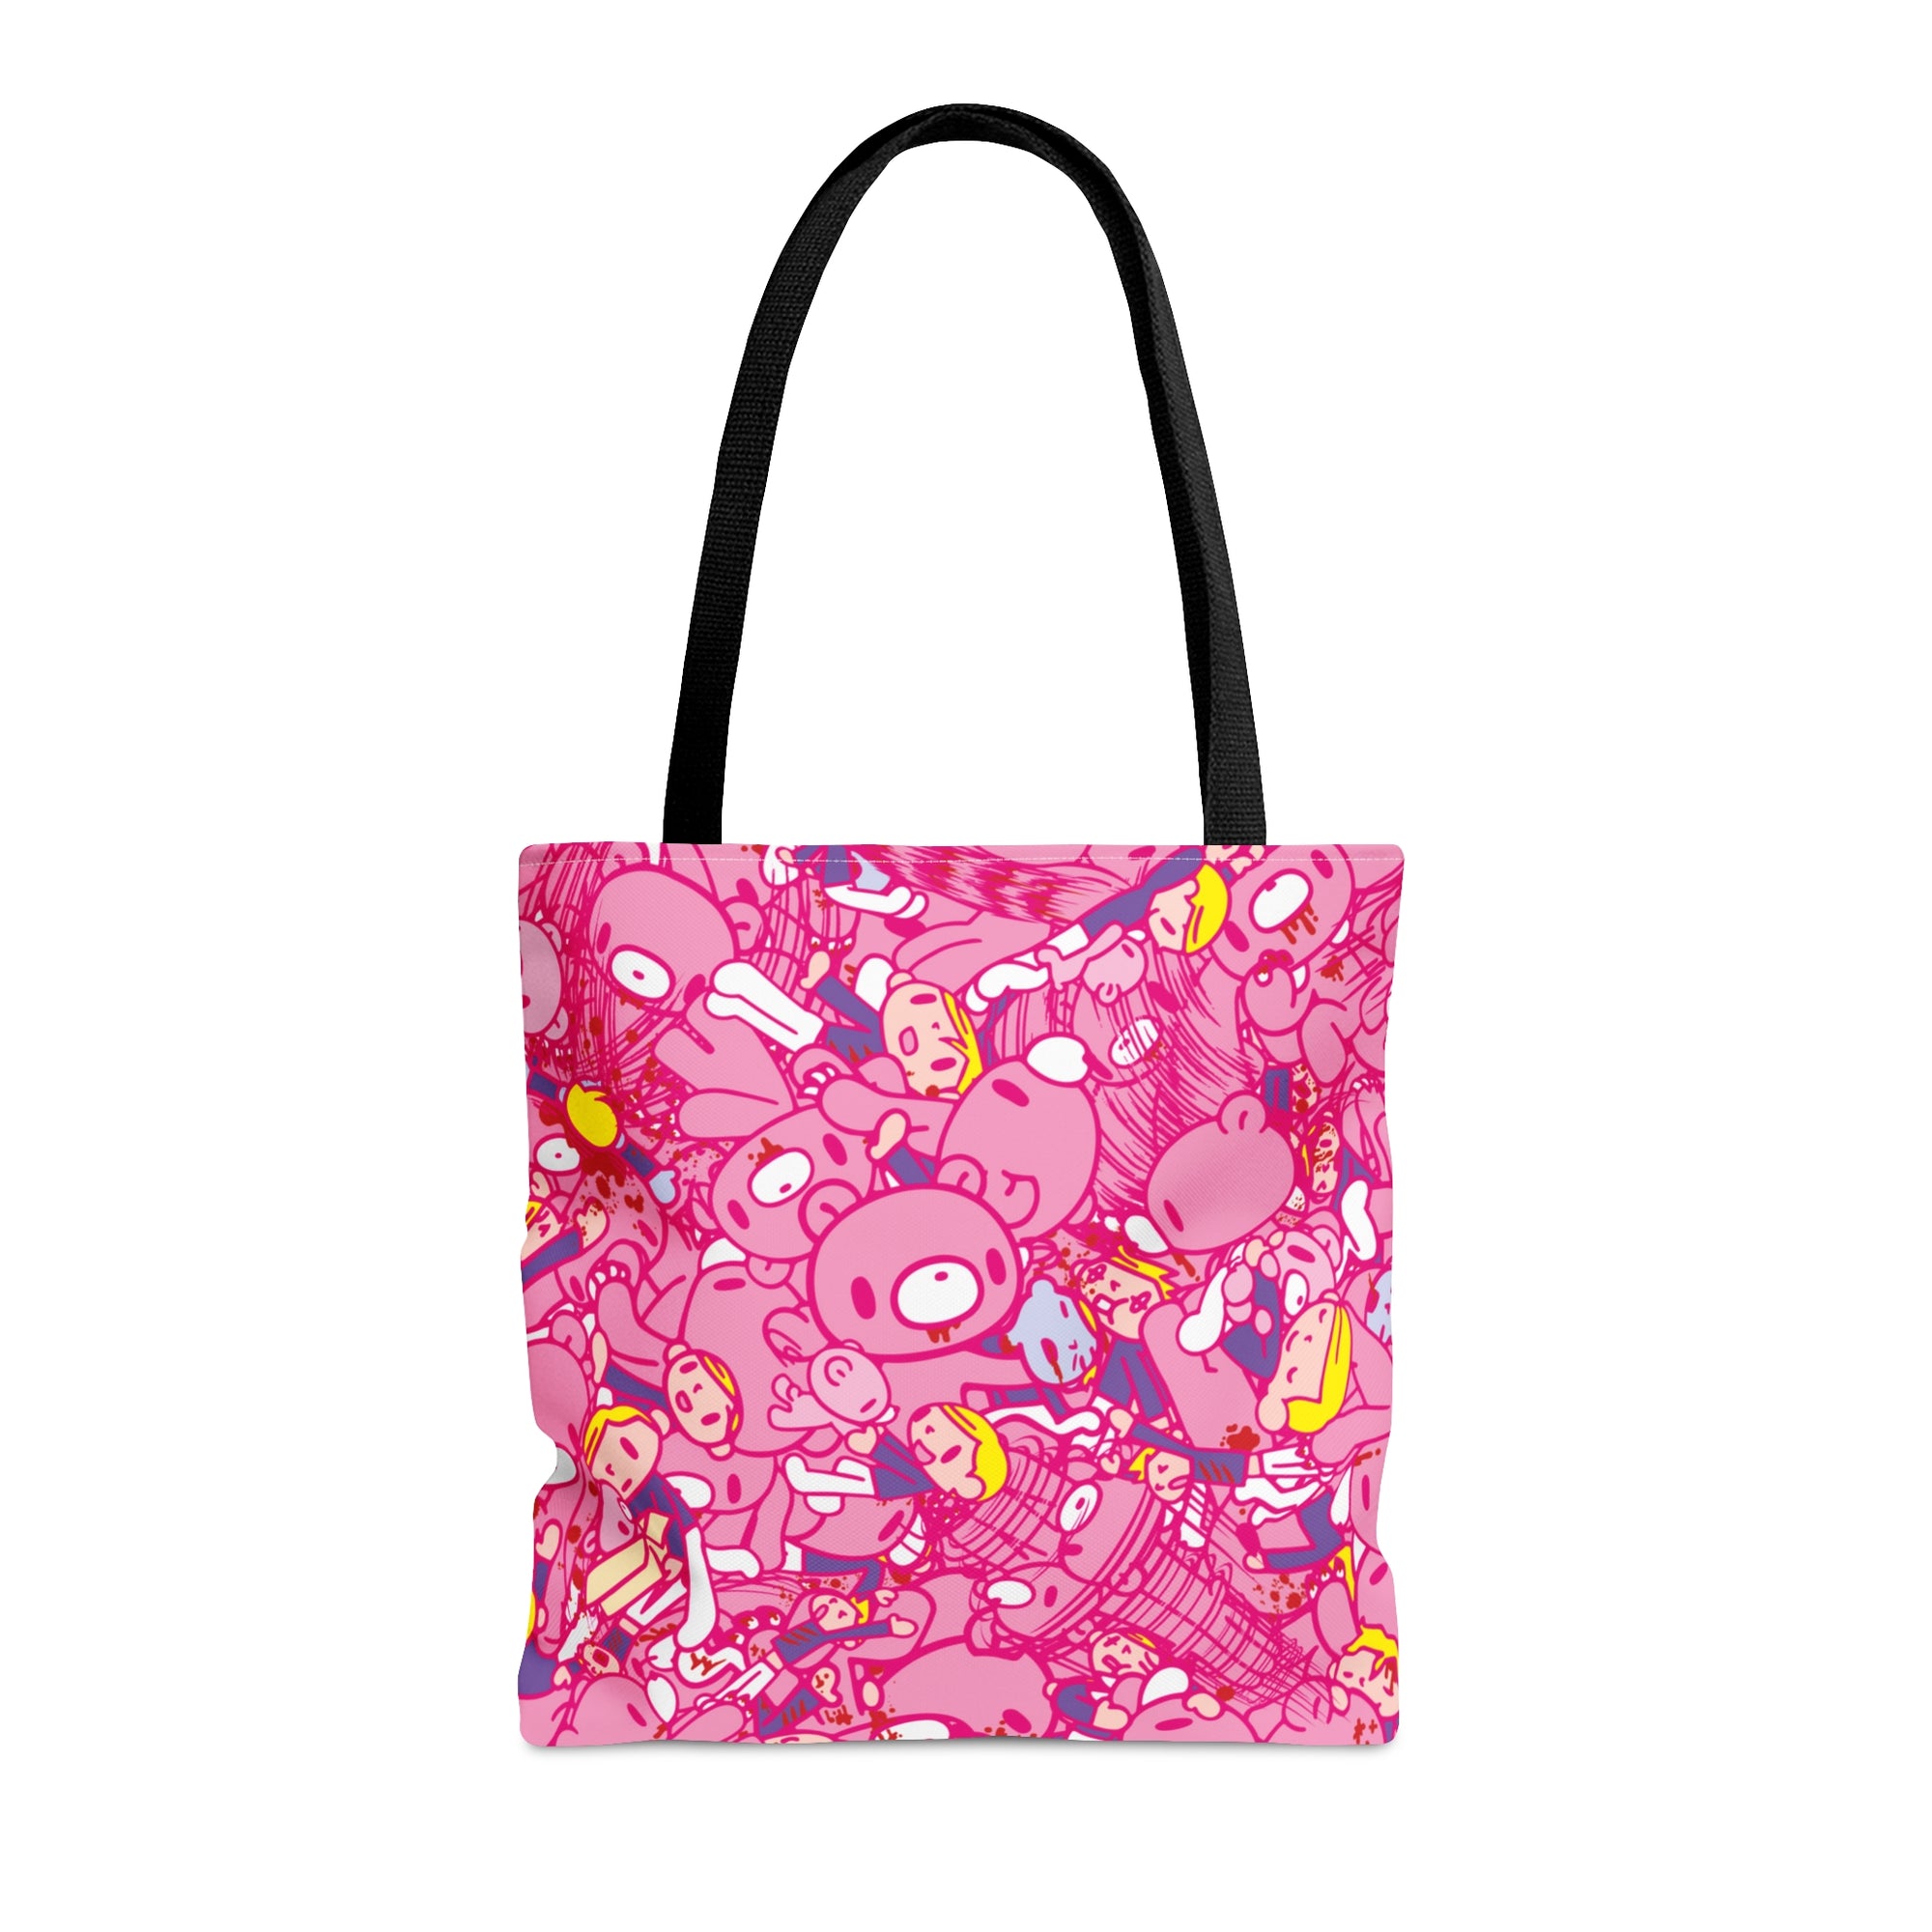 Gloomy & Pity Chaos [PINK] - Canvas Tote Bag